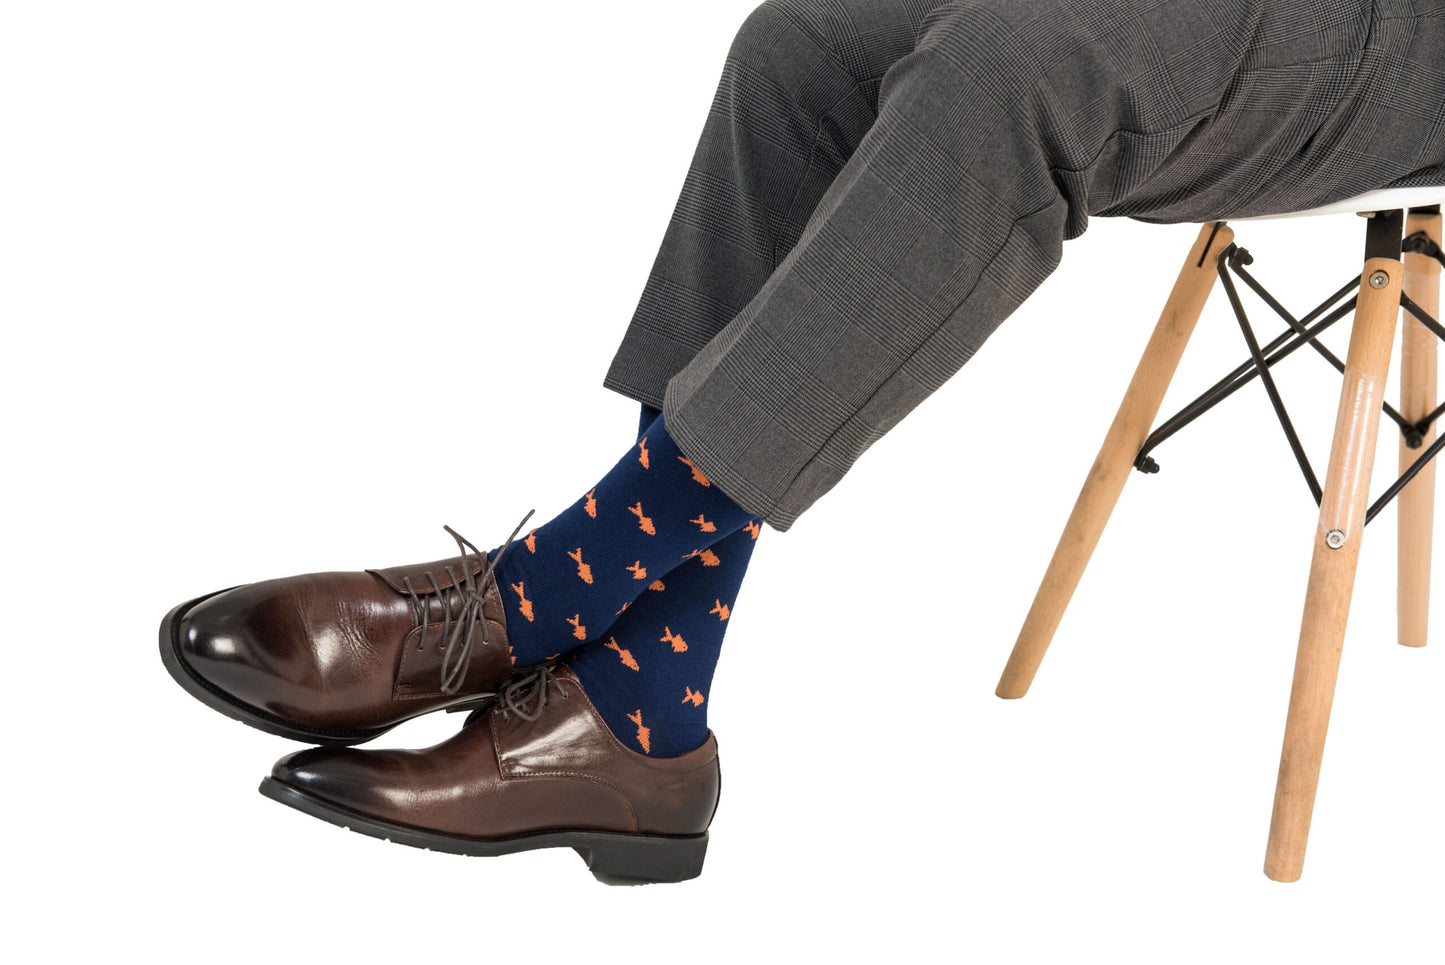 A person's legs and feet in brown shoes with Gold Fish Socks.